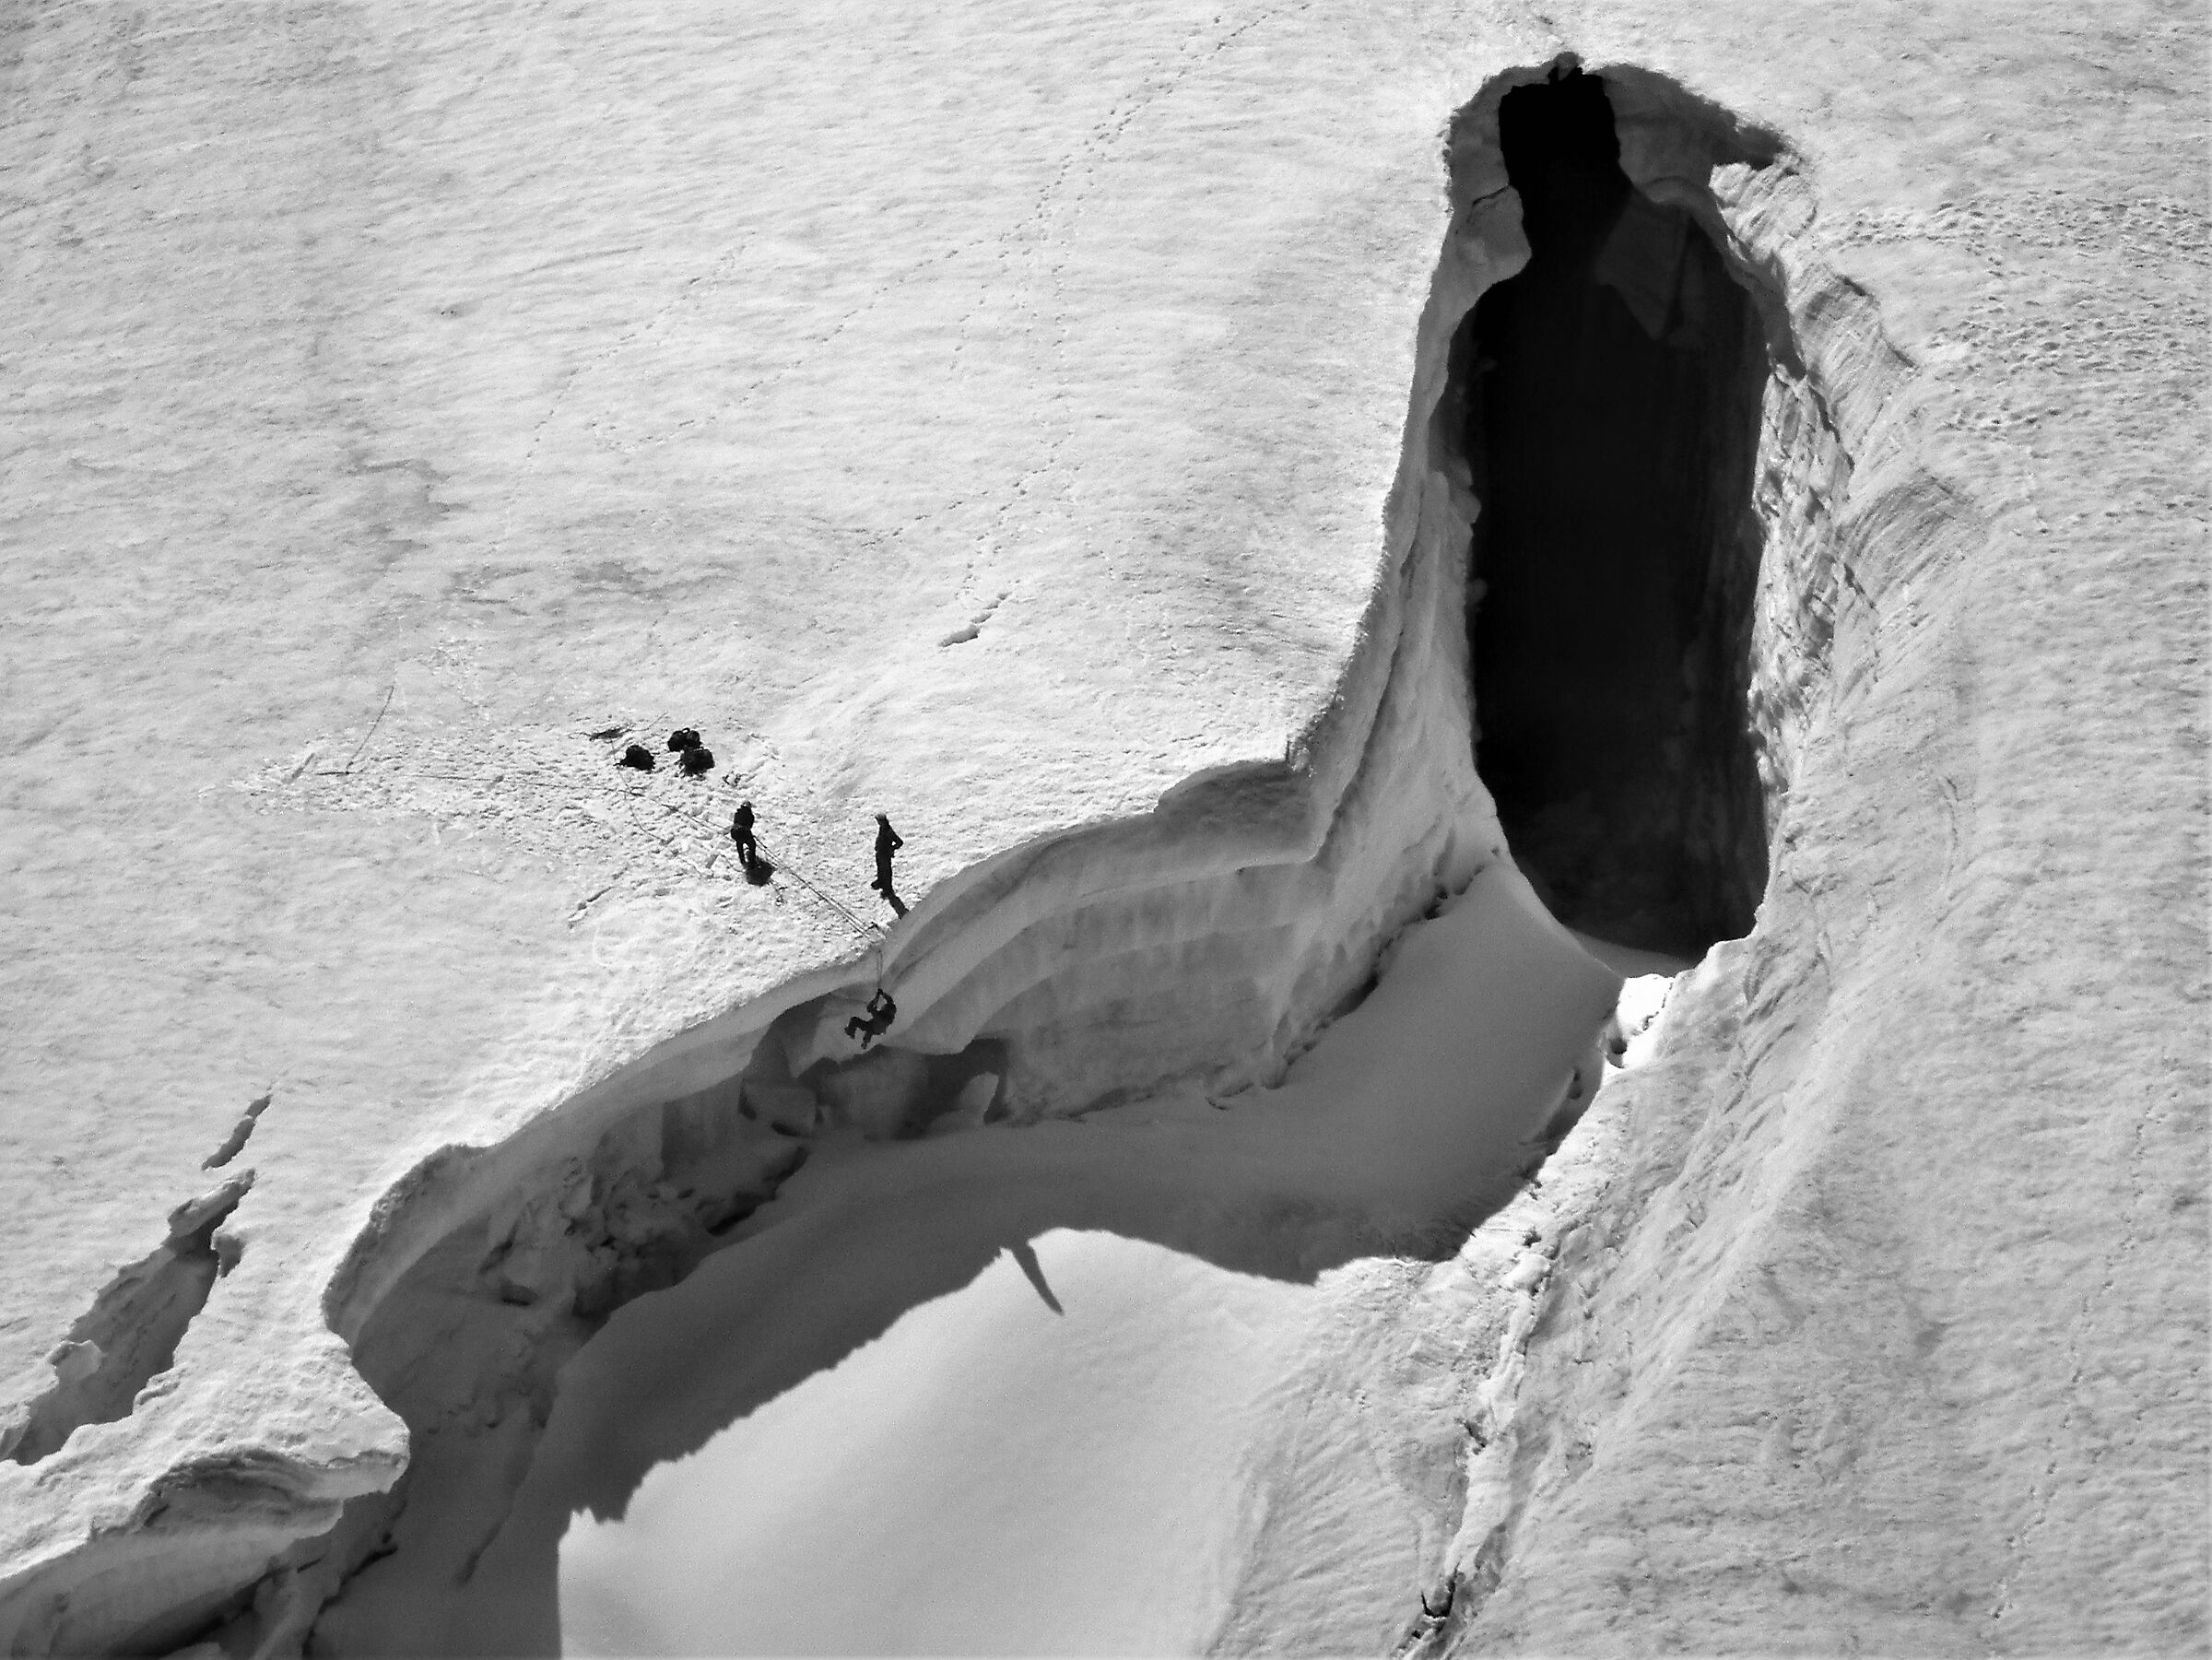 trip in a crevasse of the Mont Blanc Glacier.....